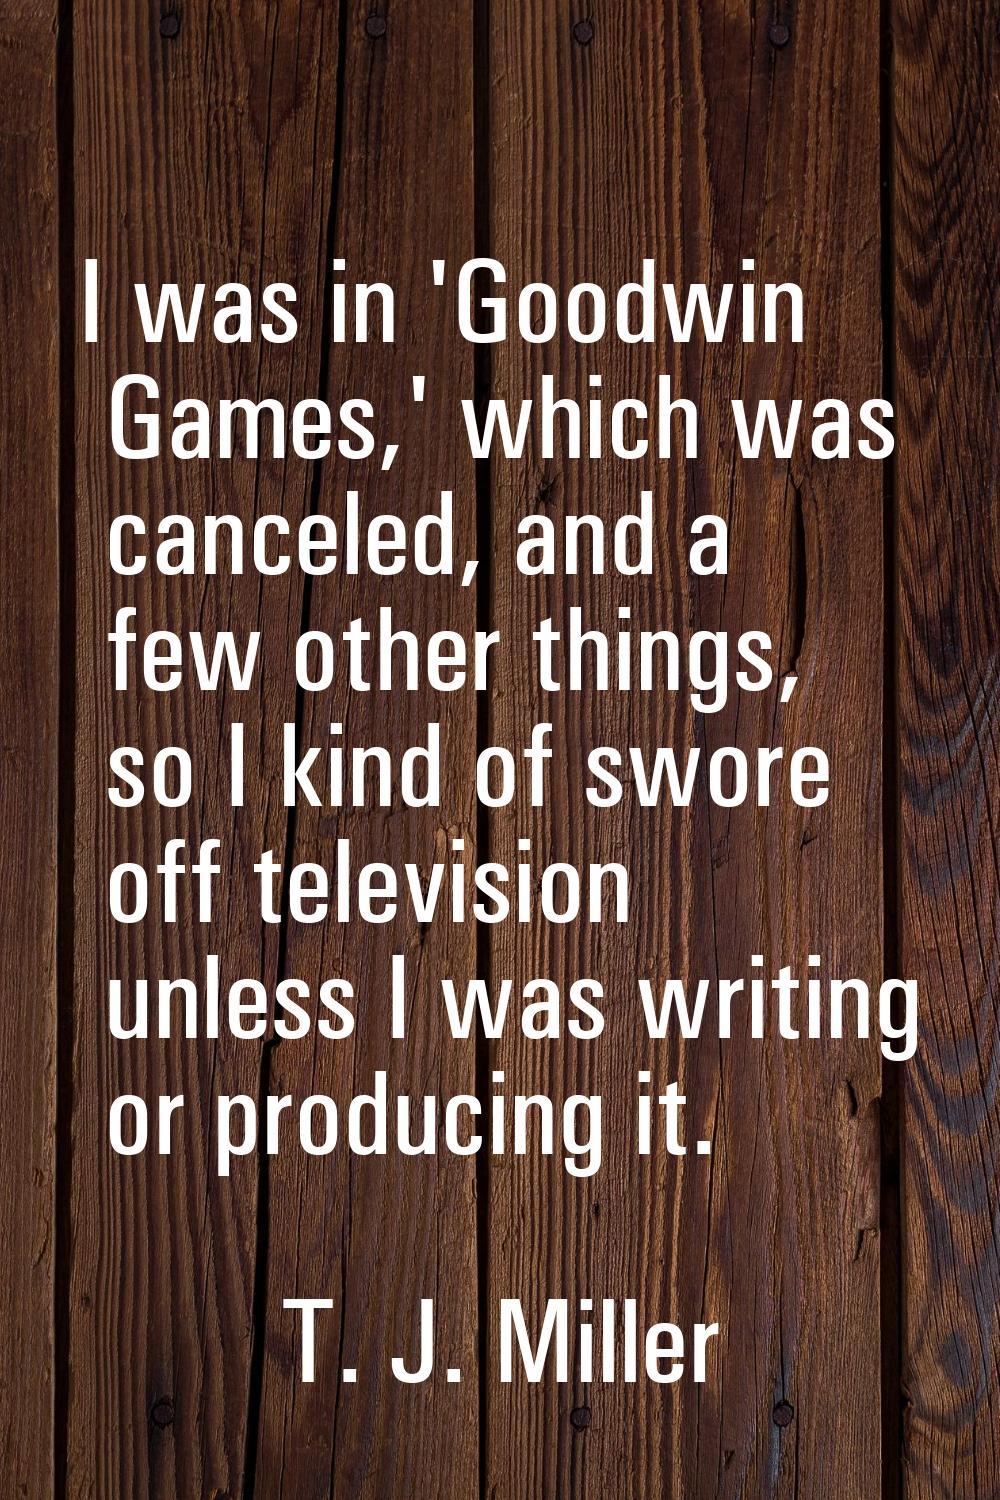 I was in 'Goodwin Games,' which was canceled, and a few other things, so I kind of swore off televi